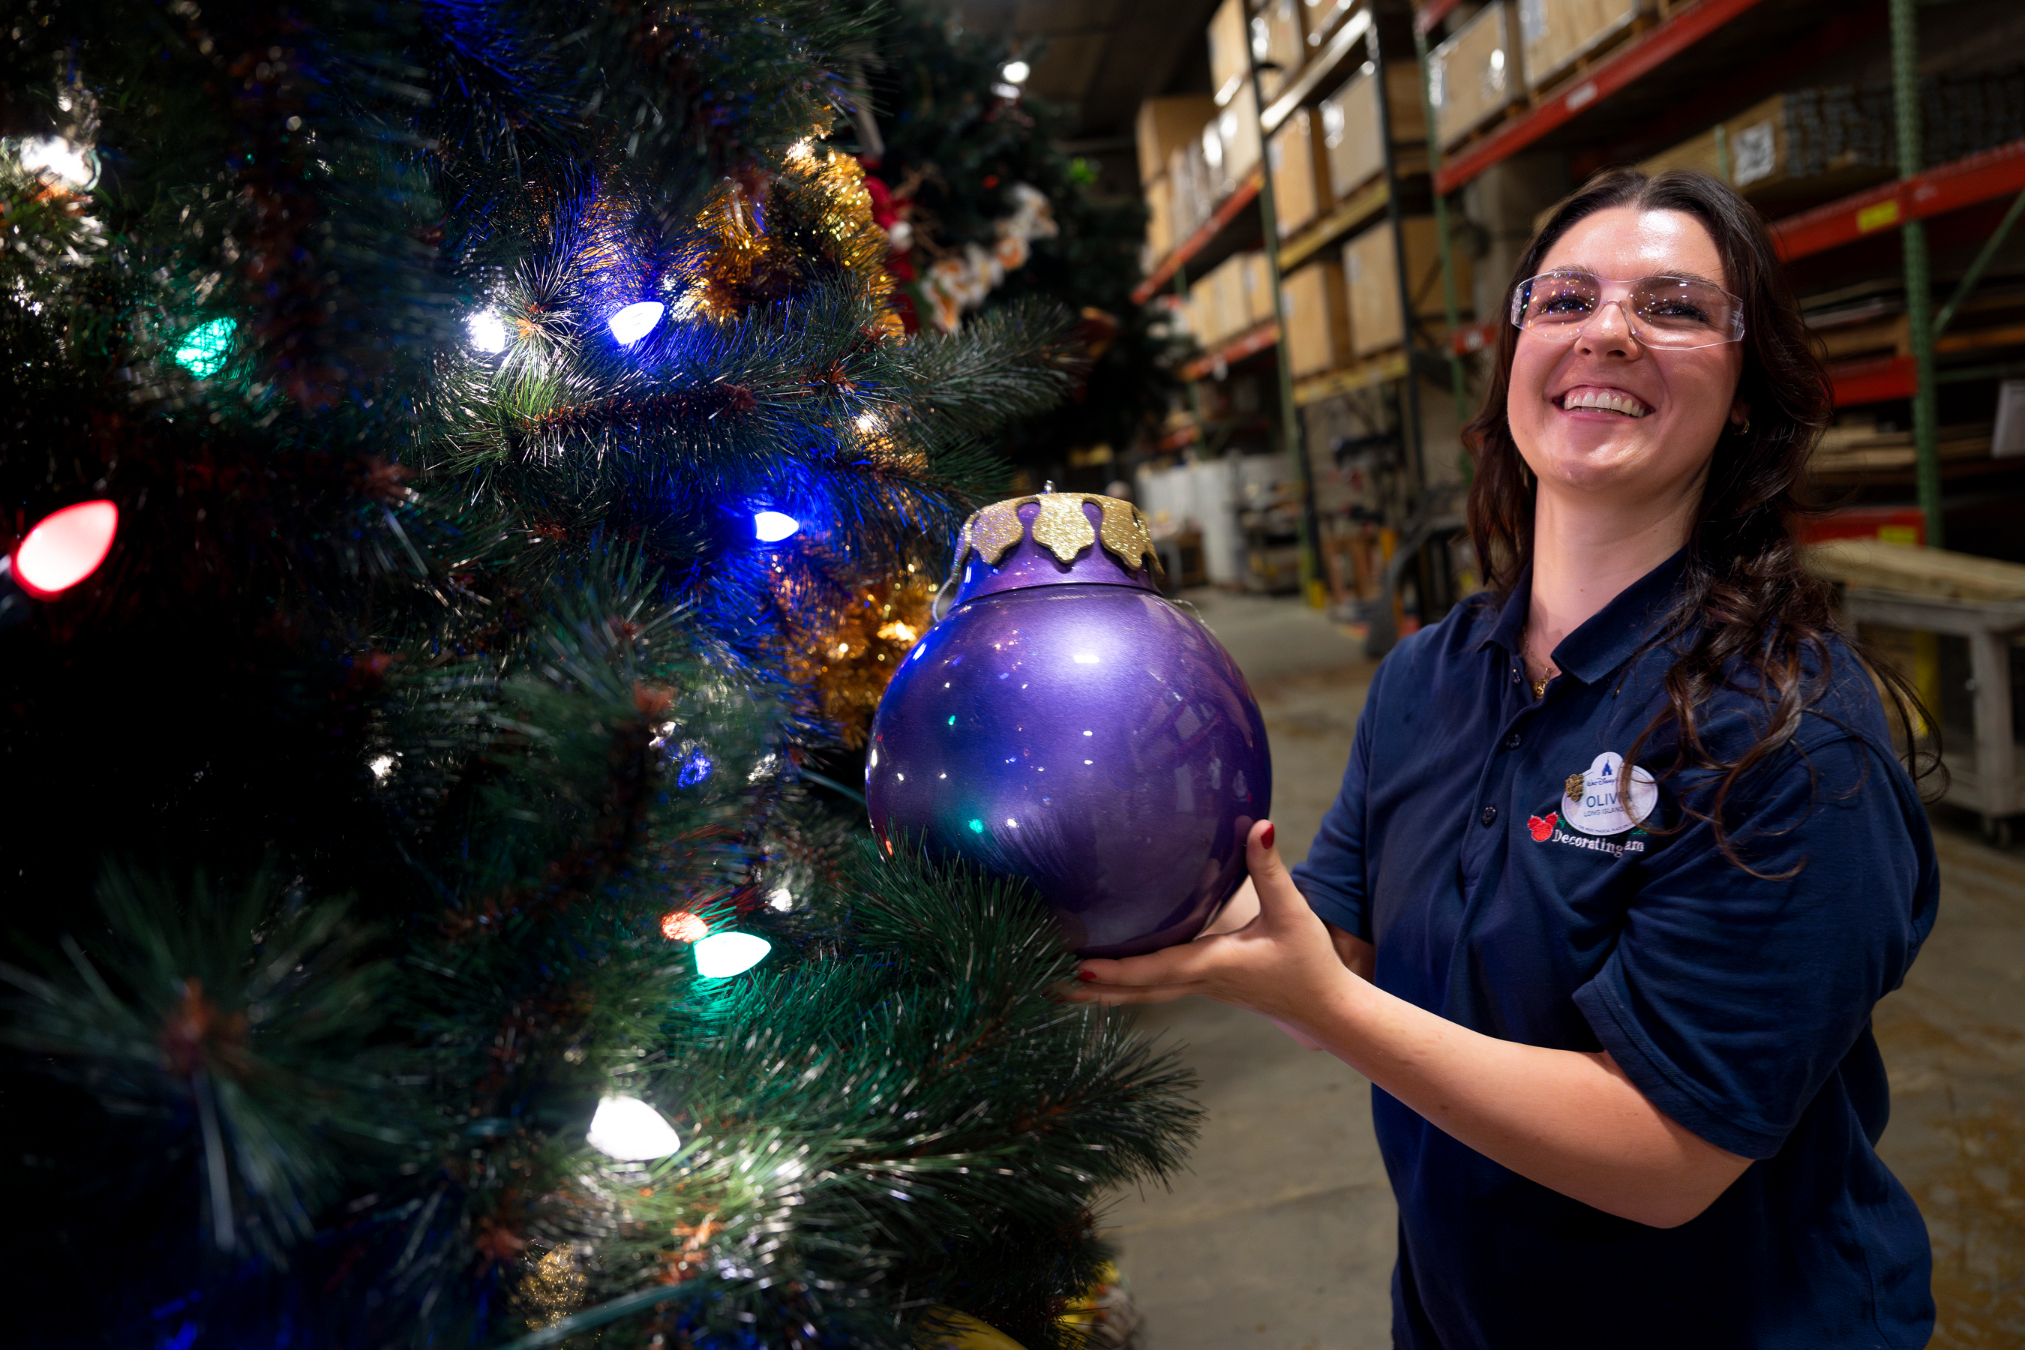 The team of designers, decorators and other professionals at Walt Disney World Holiday Services prepare and install more than 600 trees and 1,700 wreaths, and hang nearly nine miles of garland each year to transform four theme parks, resort hotels, Disney Springs and the rest of the resort into a holiday wonderland. (Harrison Cooney, Photographer)